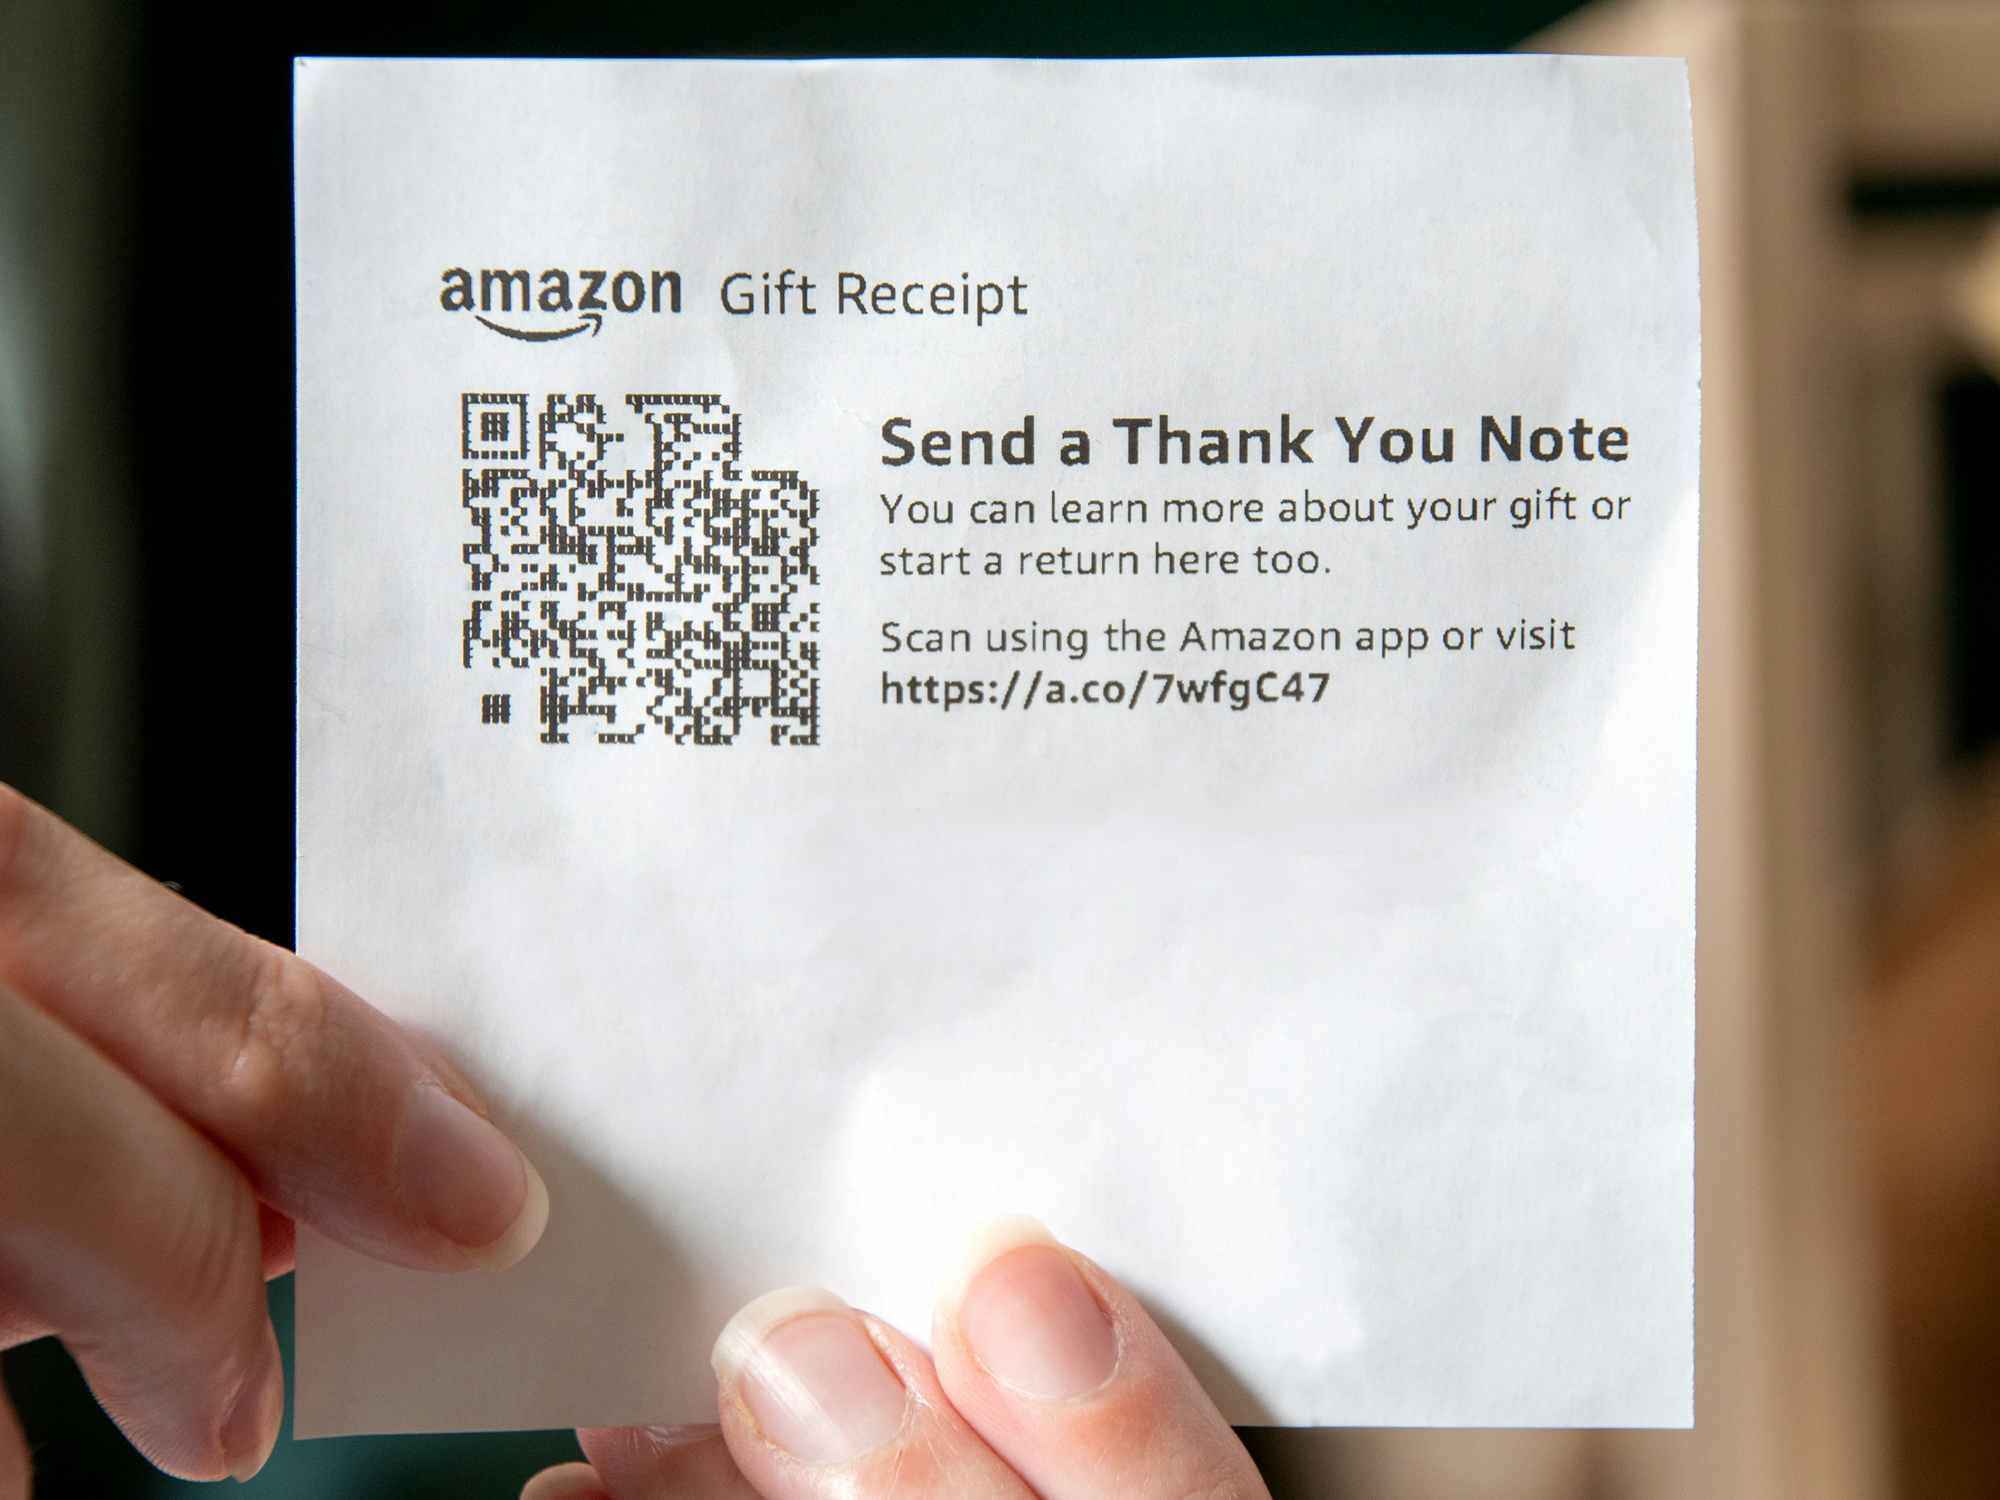 person holding an amazon gift receipt with qr code